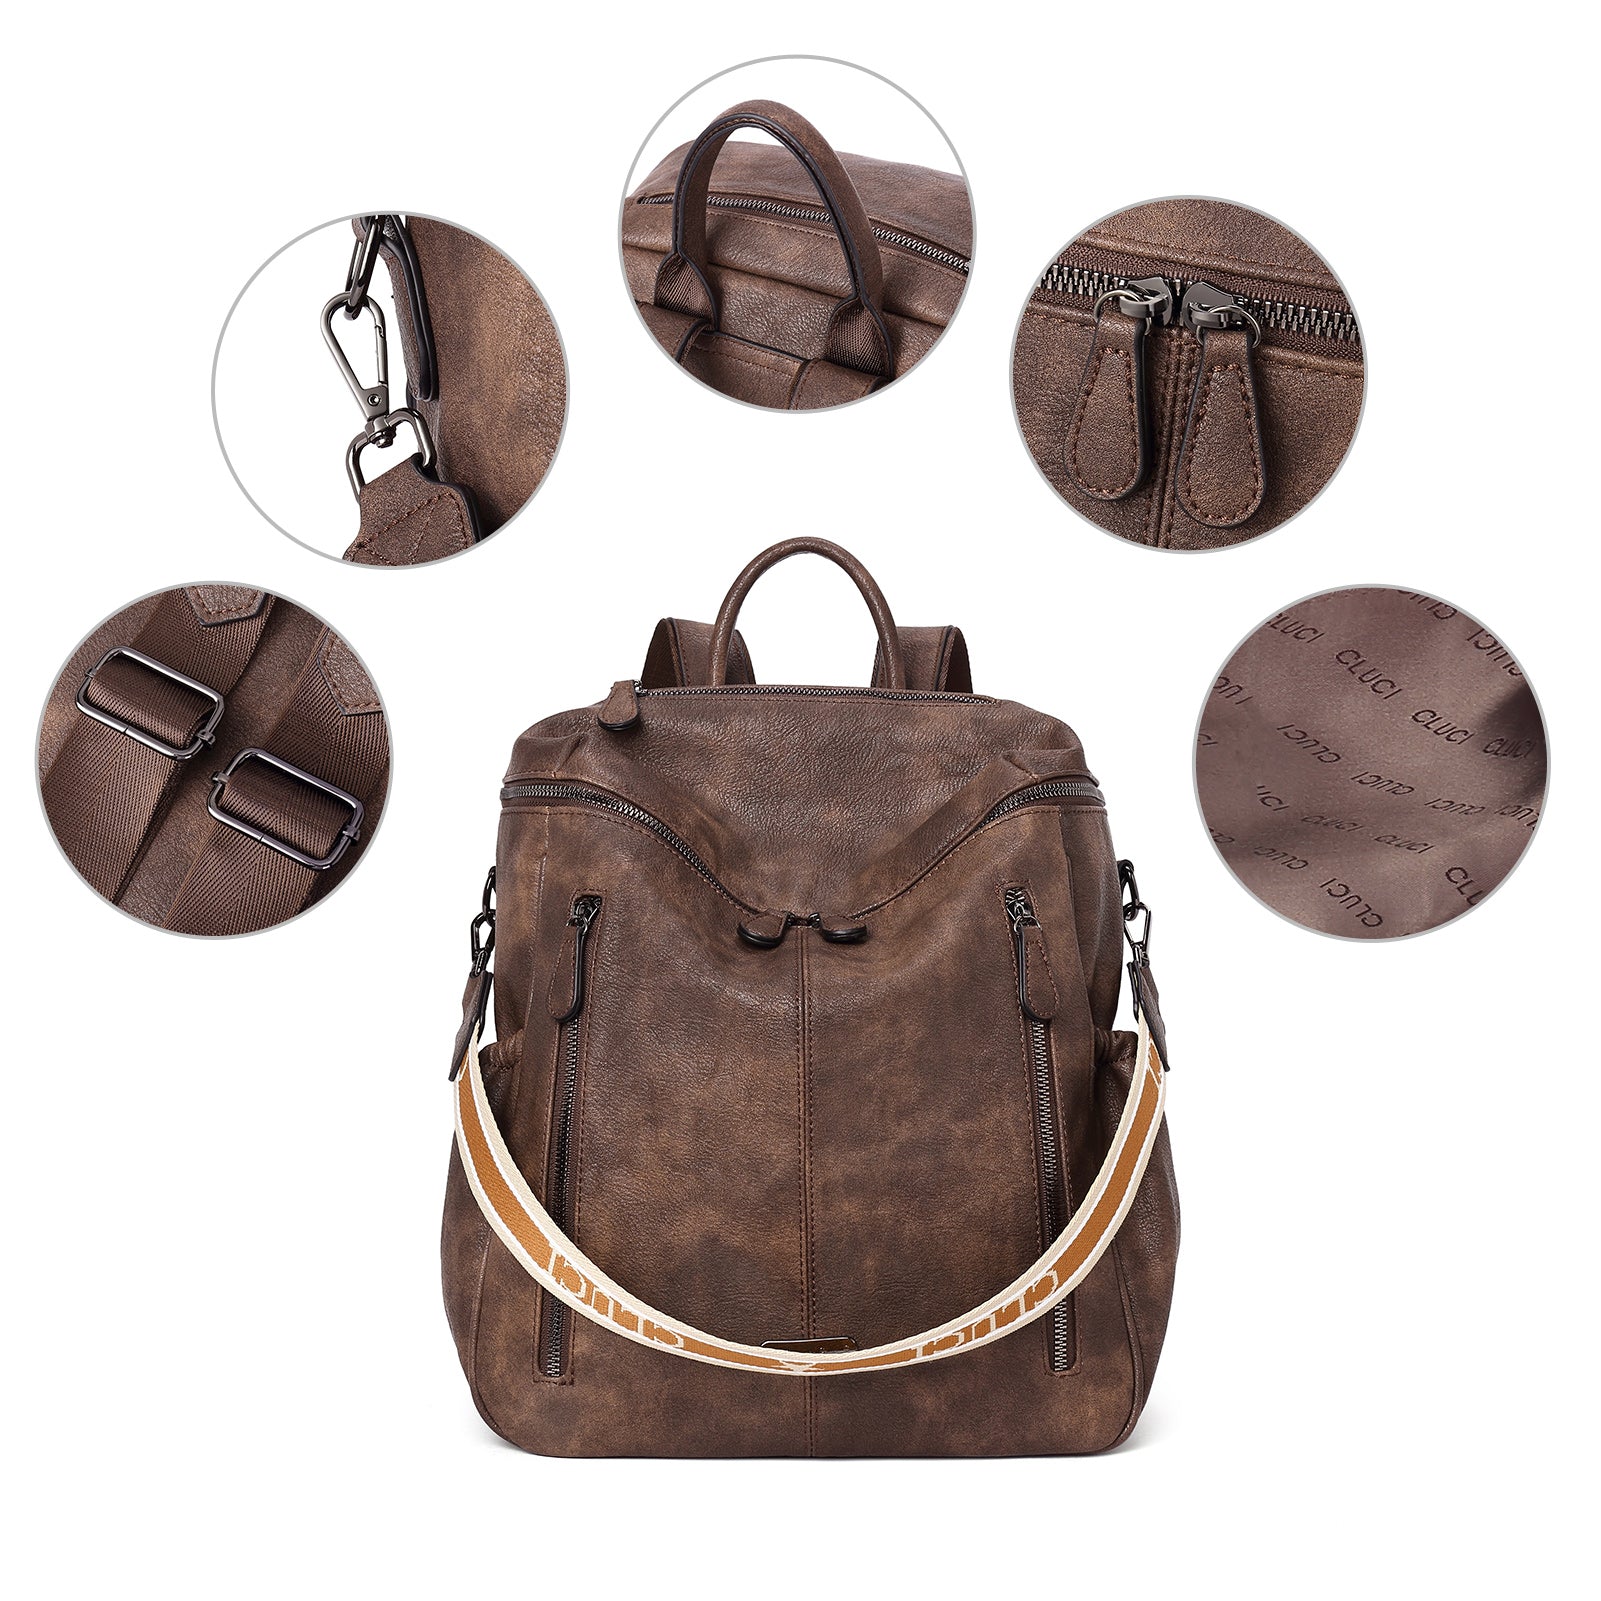 Dropship Women Pu Leather Backpack Purse Ladies Casual Shoulder Bag School  Bag to Sell Online at a Lower Price | Doba